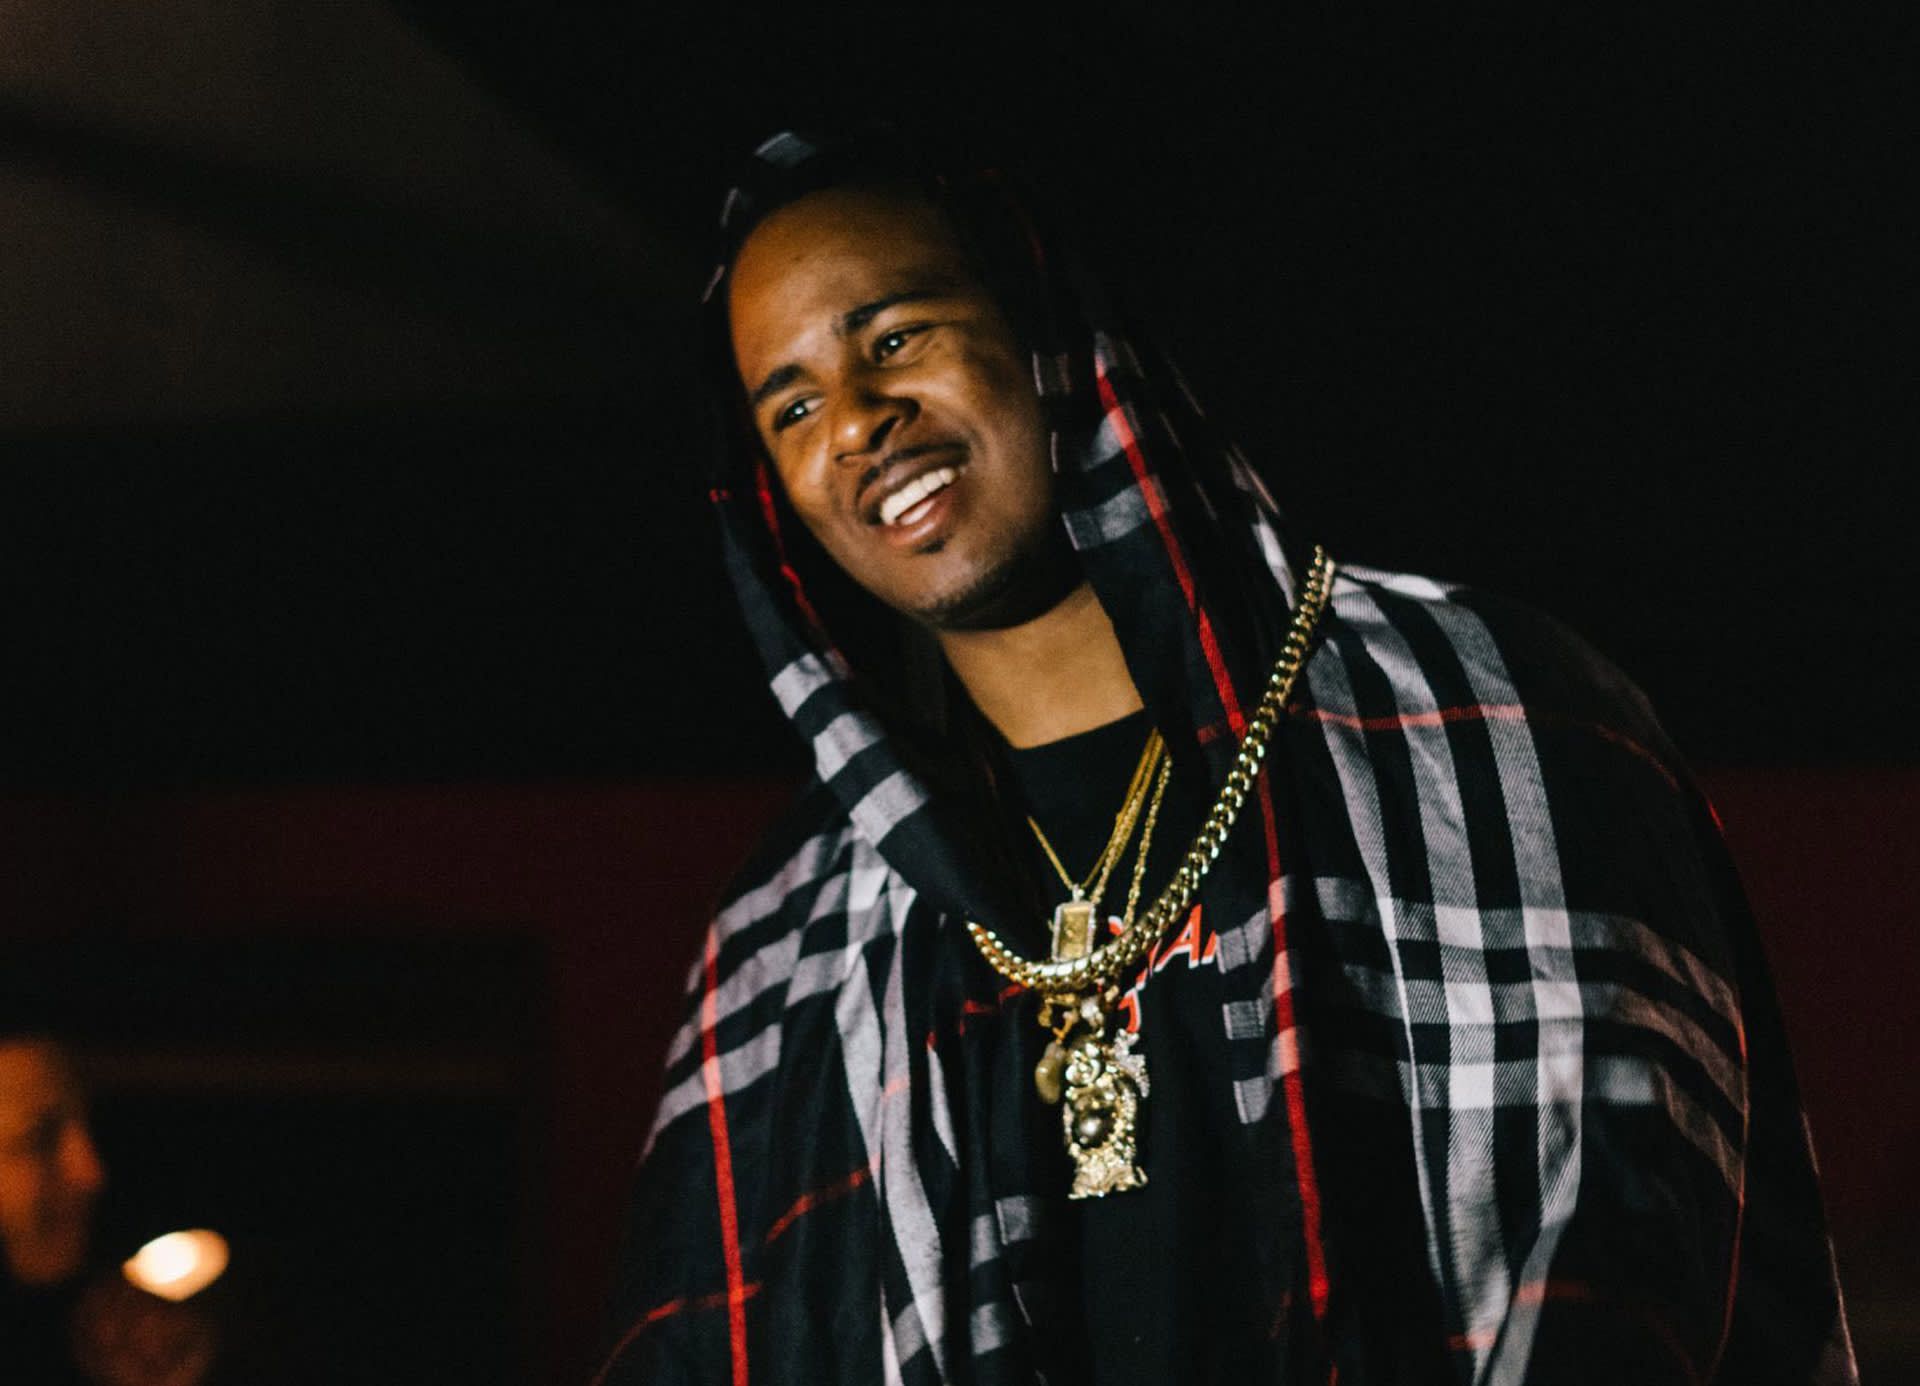 How Drakeo the Ruler Made His New Album in Jail While Awaiting Trial